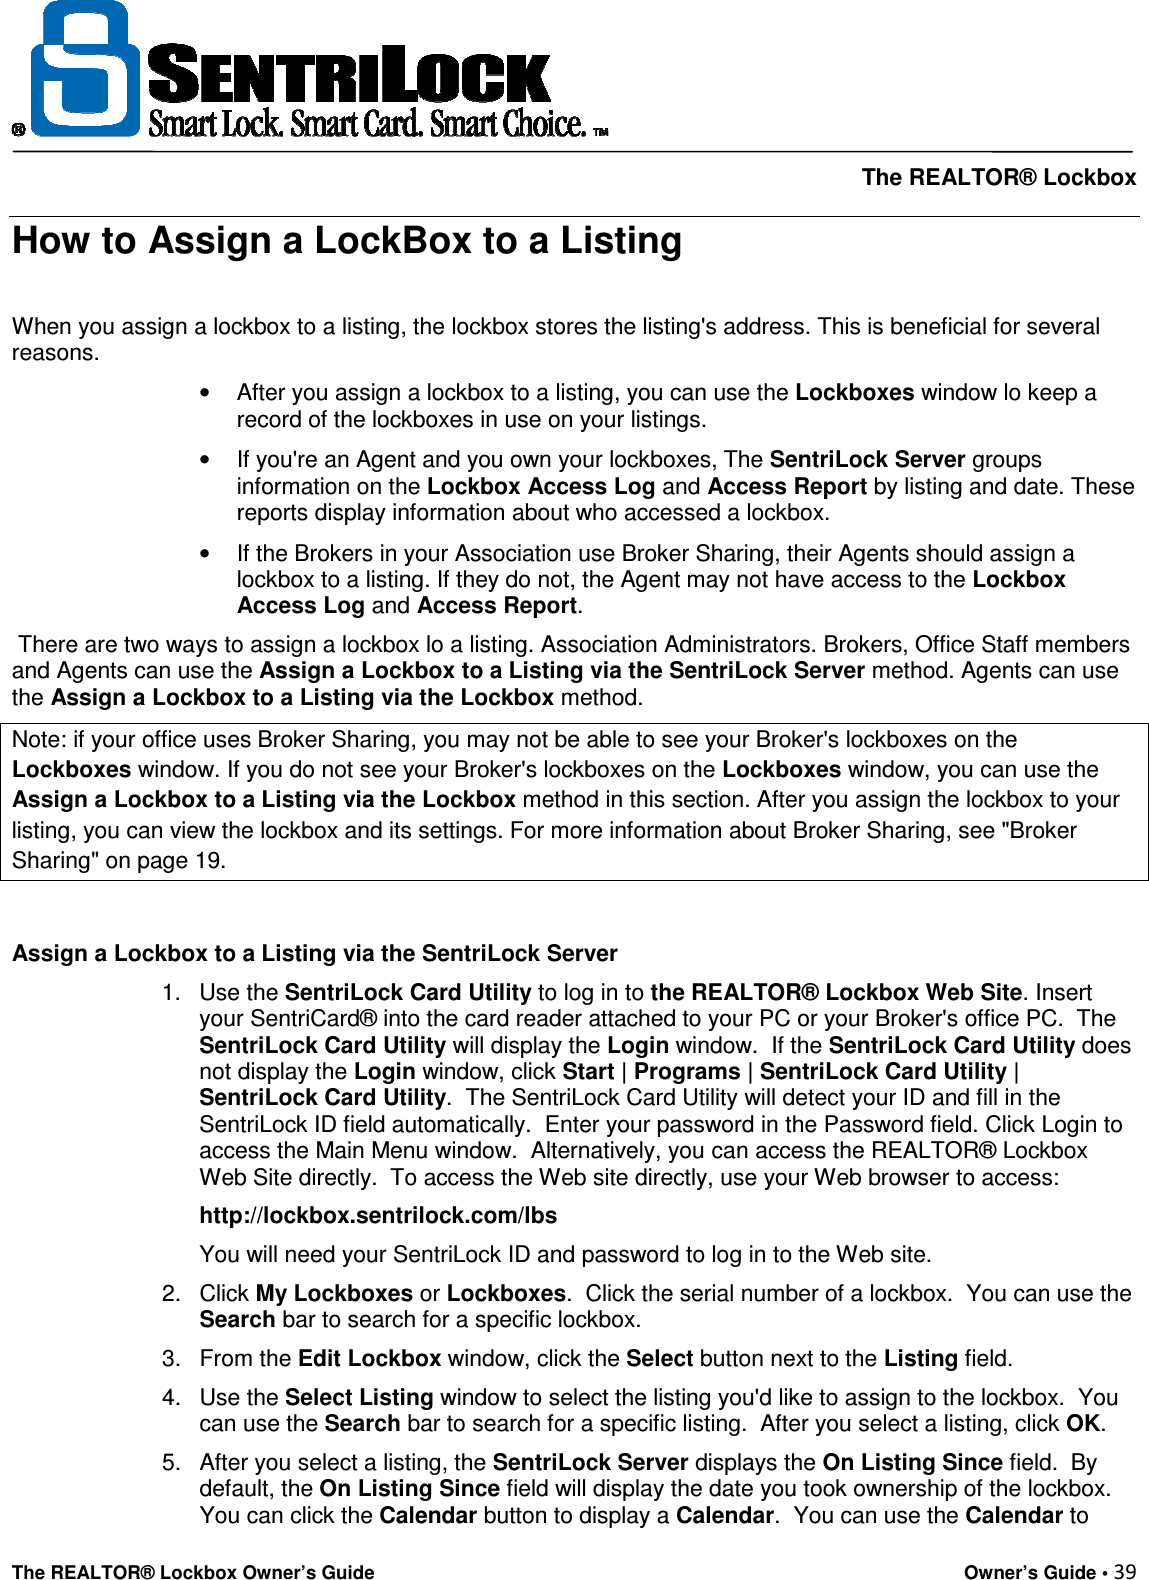     The REALTOR® Lockbox The REALTOR® Lockbox Owner’s Guide    Owner’s Guide • 39  How to Assign a LockBox to a Listing  When you assign a lockbox to a listing, the lockbox stores the listing&apos;s address. This is beneficial for several reasons.  •  After you assign a lockbox to a listing, you can use the Lockboxes window lo keep a record of the lockboxes in use on your listings.  •  If you&apos;re an Agent and you own your lockboxes, The SentriLock Server groups information on the Lockbox Access Log and Access Report by listing and date. These reports display information about who accessed a lockbox.  •  If the Brokers in your Association use Broker Sharing, their Agents should assign a lockbox to a listing. If they do not, the Agent may not have access to the Lockbox Access Log and Access Report.  There are two ways to assign a lockbox lo a listing. Association Administrators. Brokers, Office Staff members and Agents can use the Assign a Lockbox to a Listing via the SentriLock Server method. Agents can use the Assign a Lockbox to a Listing via the Lockbox method. Note: if your office uses Broker Sharing, you may not be able to see your Broker&apos;s lockboxes on the Lockboxes window. If you do not see your Broker&apos;s lockboxes on the Lockboxes window, you can use the Assign a Lockbox to a Listing via the Lockbox method in this section. After you assign the lockbox to your listing, you can view the lockbox and its settings. For more information about Broker Sharing, see &quot;Broker Sharing&quot; on page 19.  Assign a Lockbox to a Listing via the SentriLock Server  1.  Use the SentriLock Card Utility to log in to the REALTOR® Lockbox Web Site. Insert your SentriCard® into the card reader attached to your PC or your Broker&apos;s office PC.  The SentriLock Card Utility will display the Login window.  If the SentriLock Card Utility does not display the Login window, click Start | Programs | SentriLock Card Utility | SentriLock Card Utility.  The SentriLock Card Utility will detect your ID and fill in the SentriLock ID field automatically.  Enter your password in the Password field. Click Login to access the Main Menu window.  Alternatively, you can access the REALTOR® Lockbox Web Site directly.  To access the Web site directly, use your Web browser to access:  http://lockbox.sentrilock.com/lbs  You will need your SentriLock ID and password to log in to the Web site.  2.  Click My Lockboxes or Lockboxes.  Click the serial number of a lockbox.  You can use the Search bar to search for a specific lockbox.  3.  From the Edit Lockbox window, click the Select button next to the Listing field.  4.  Use the Select Listing window to select the listing you&apos;d like to assign to the lockbox.  You can use the Search bar to search for a specific listing.  After you select a listing, click OK.  5.  After you select a listing, the SentriLock Server displays the On Listing Since field.  By default, the On Listing Since field will display the date you took ownership of the lockbox.  You can click the Calendar button to display a Calendar.  You can use the Calendar to 